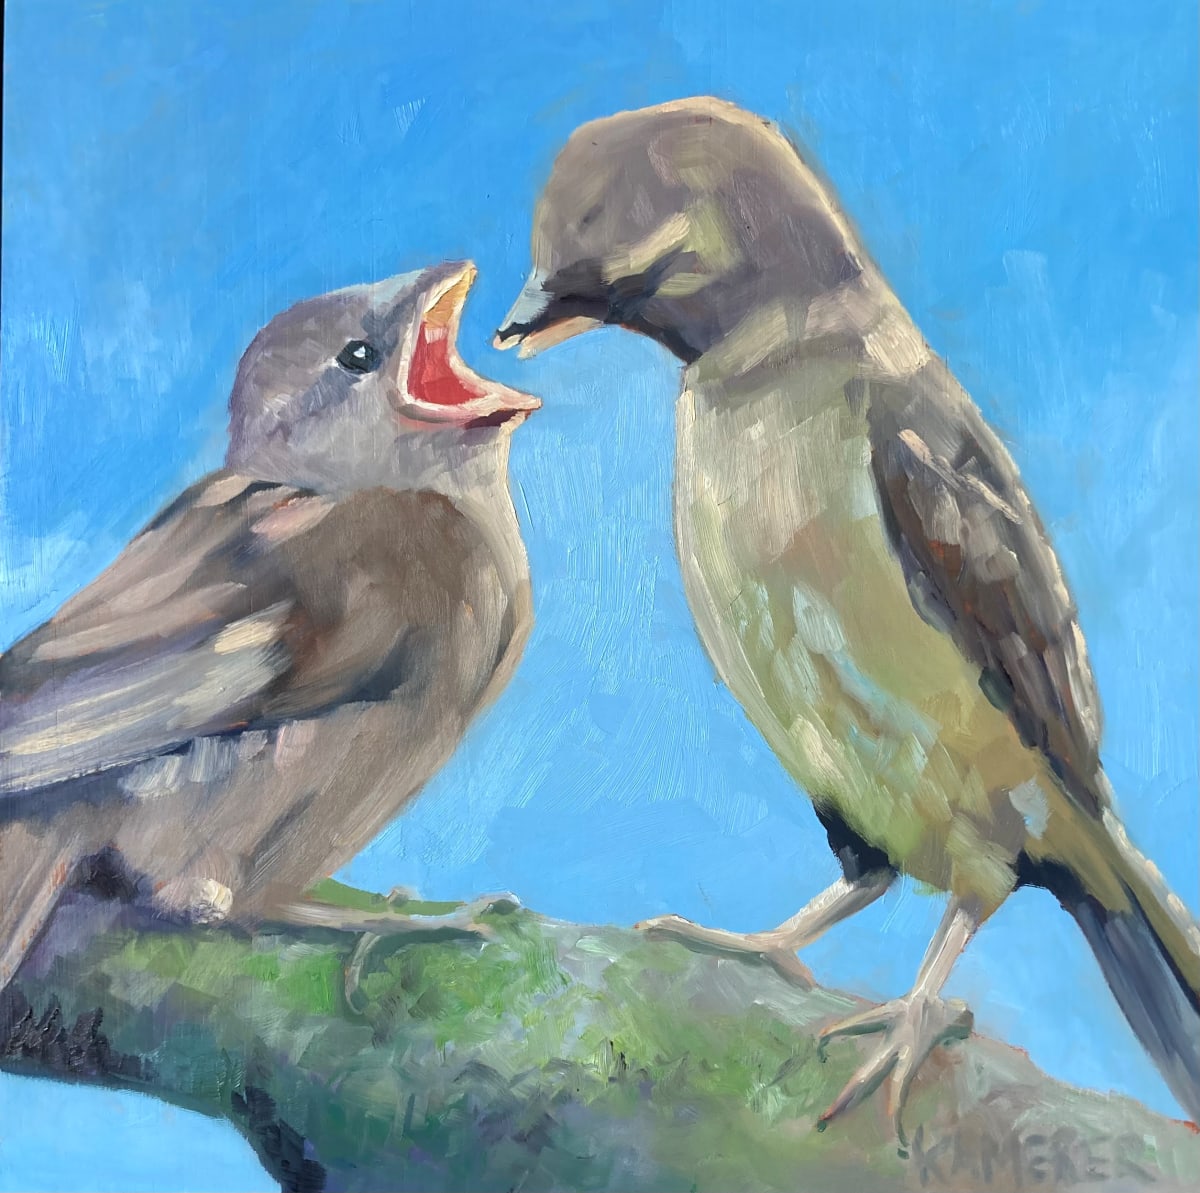 Don’t Ever Grow Up  Image: One minute you seem to be hand-feeding them and the next minute, they are flying the nest. 
This little painting reminds me of a popular song that says, "Oh darlin', don't you ever grow up.  Just stay this little!" 


Custom framed in a natural wood floating frame. 